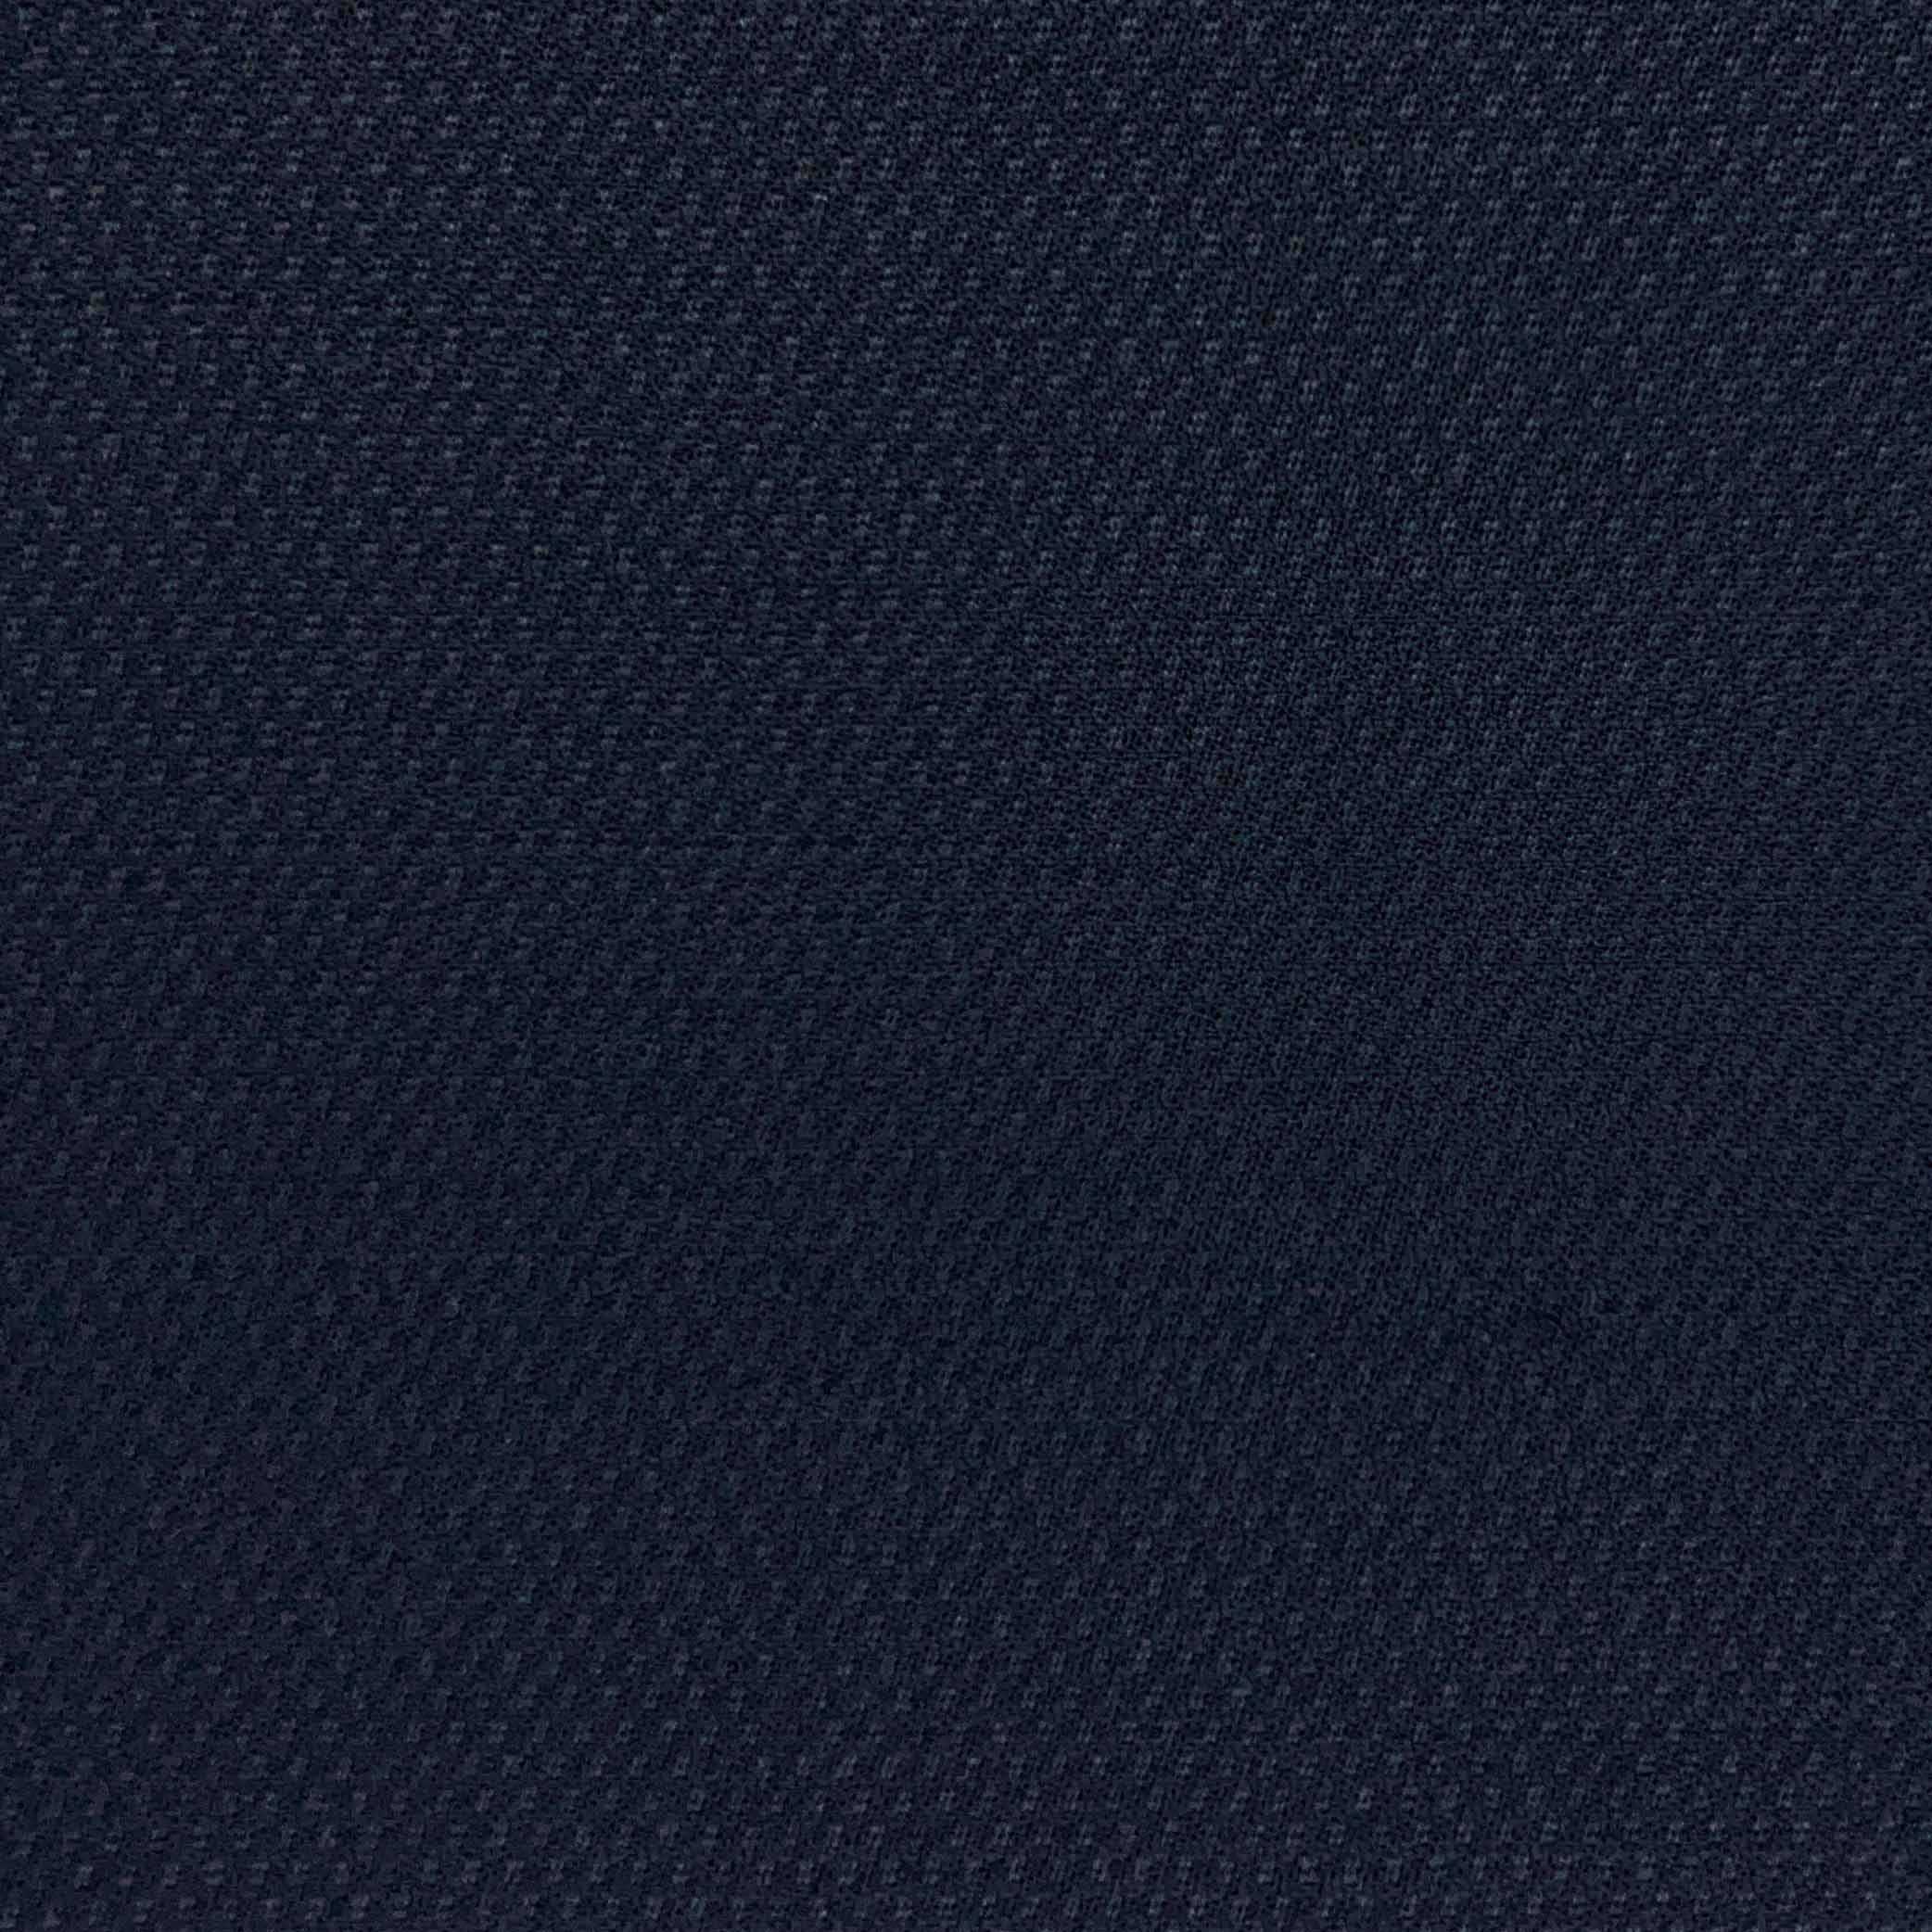 Westwood Hart Online Custom Hand Tailor Suits Sportcoats Trousers Waistcoats Overcoats Made To Measure Formalwear Tuxedo Midnight Blue Birdseye With Comfort Stretch